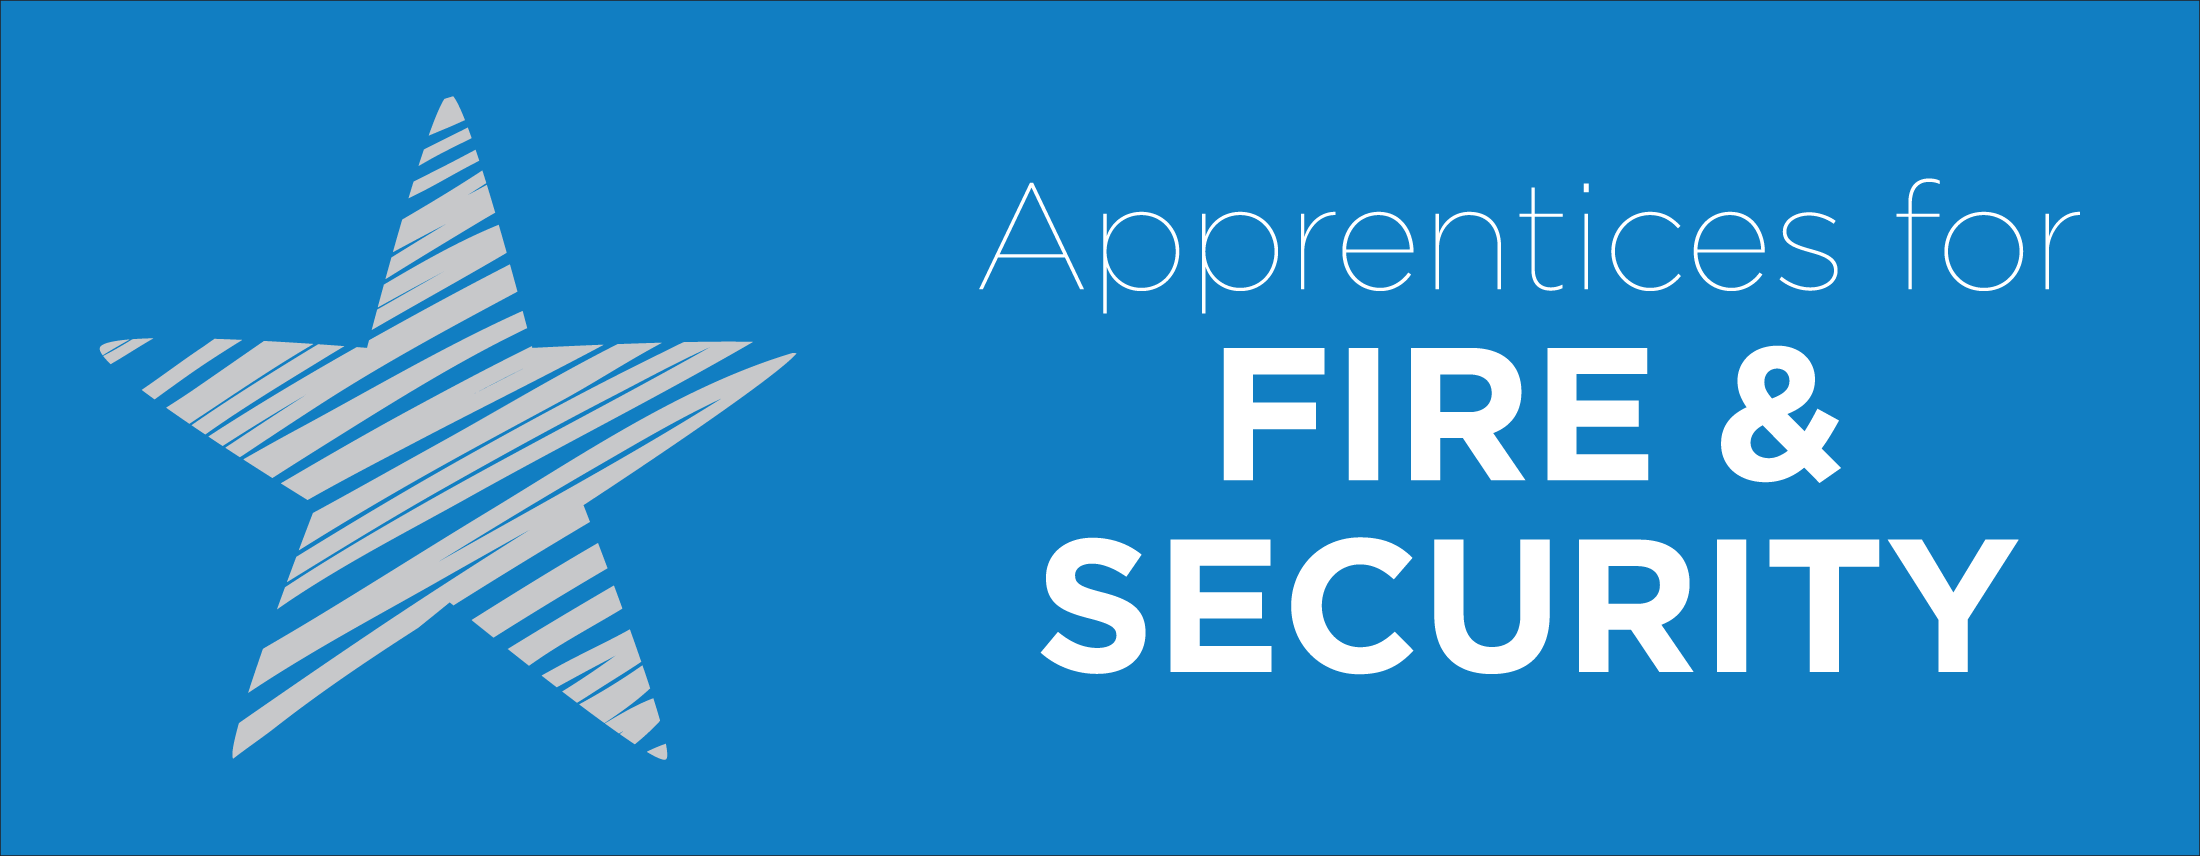 Apprentices-for-Fire-and-Security-logo